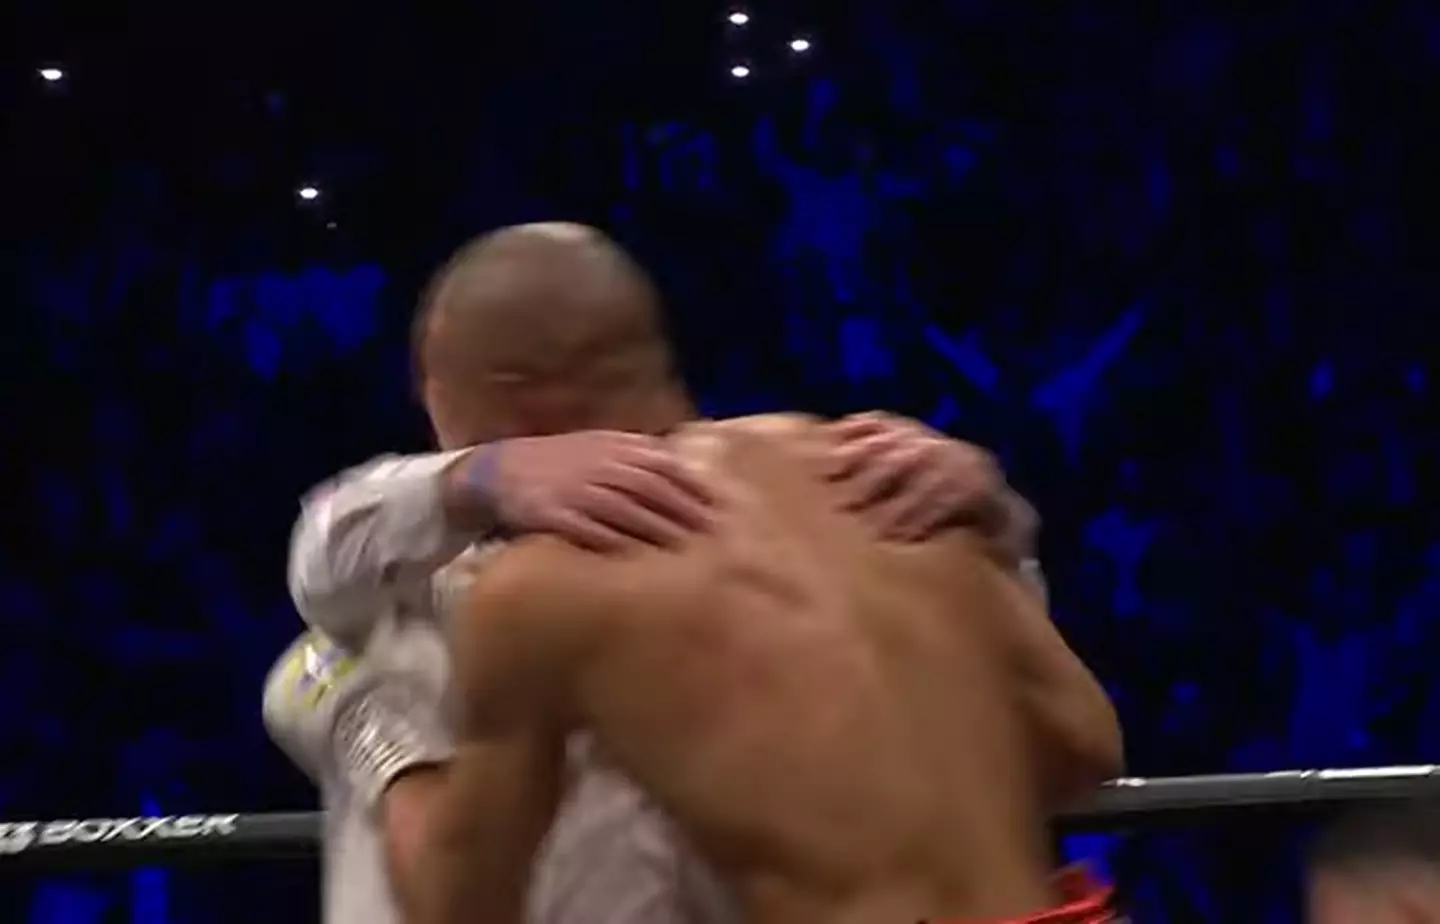 The ref tried to hold back Eubank and explain the fight was over.